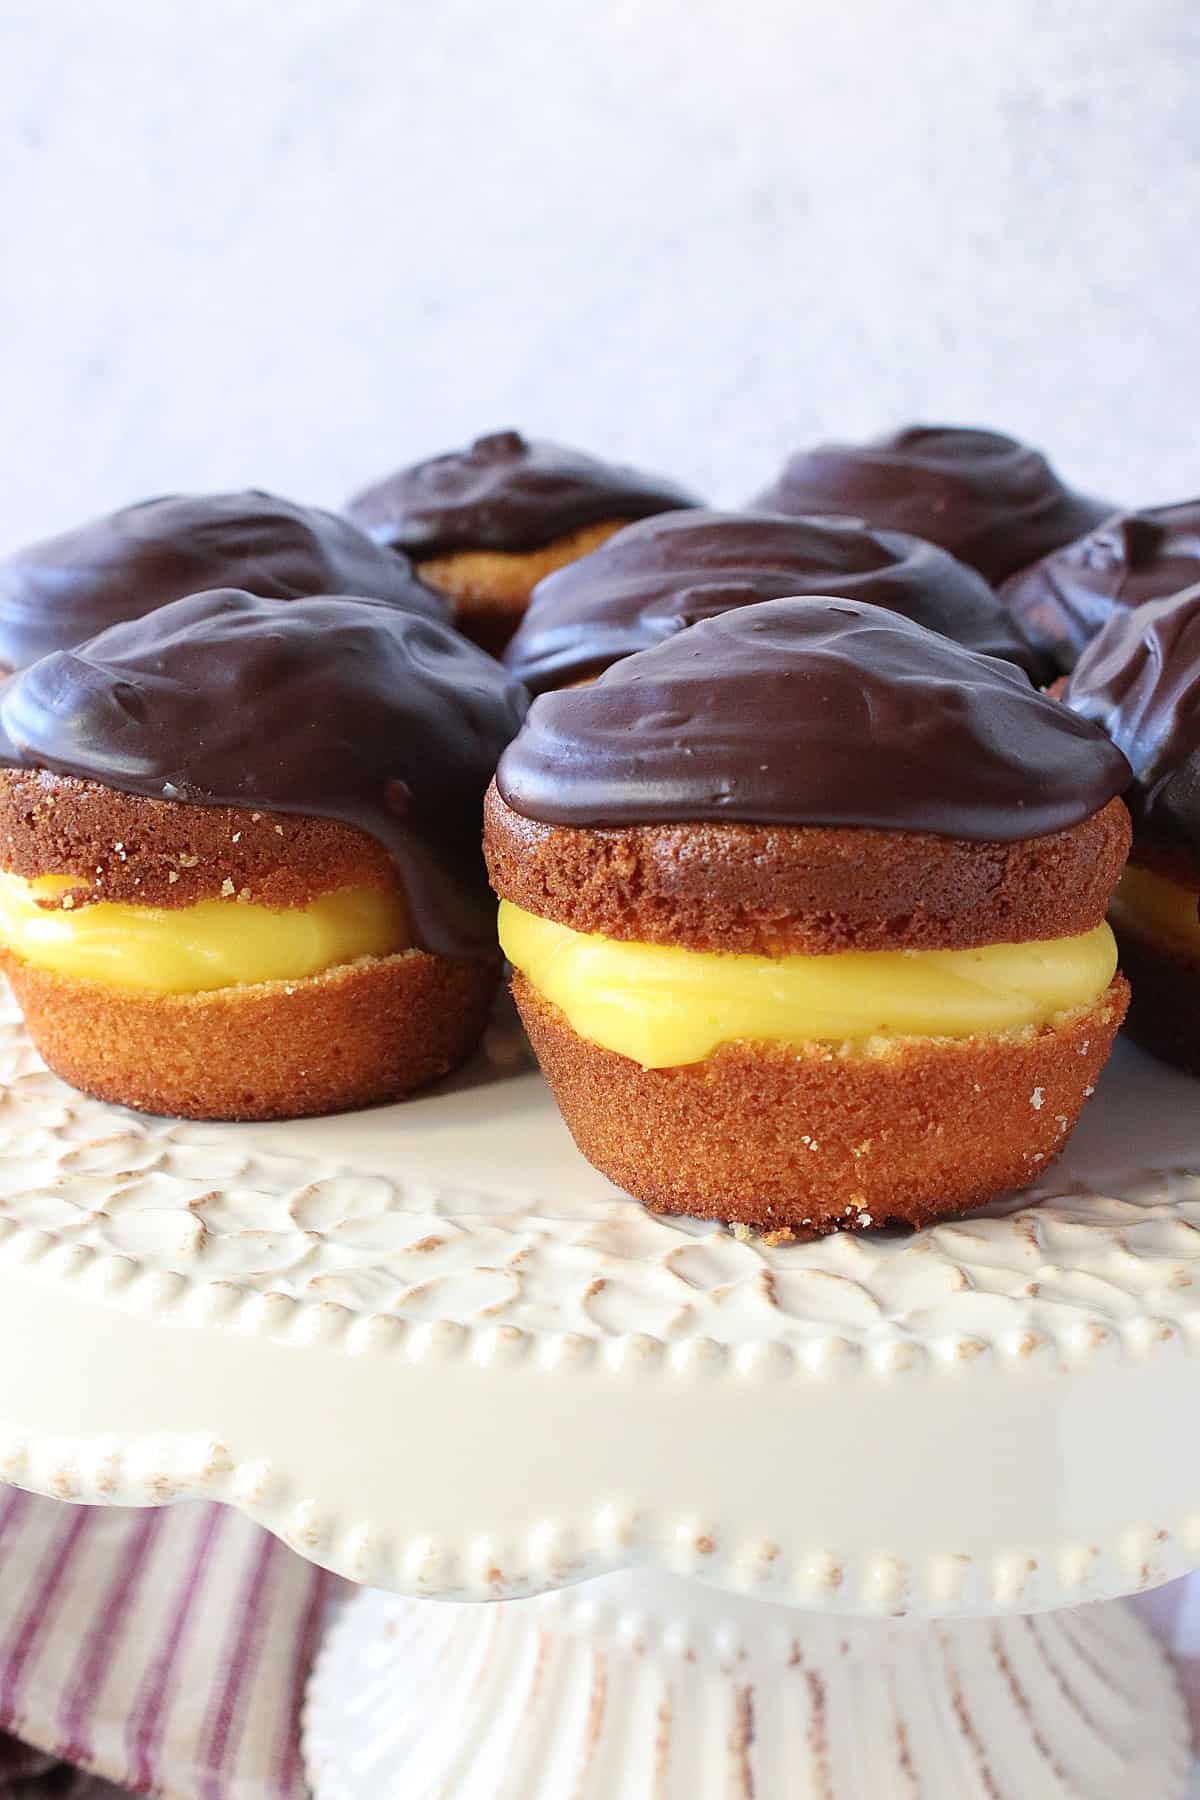 A cake plate filled with Boston Cream Cupcakes with chocolate ganache frosting on top.